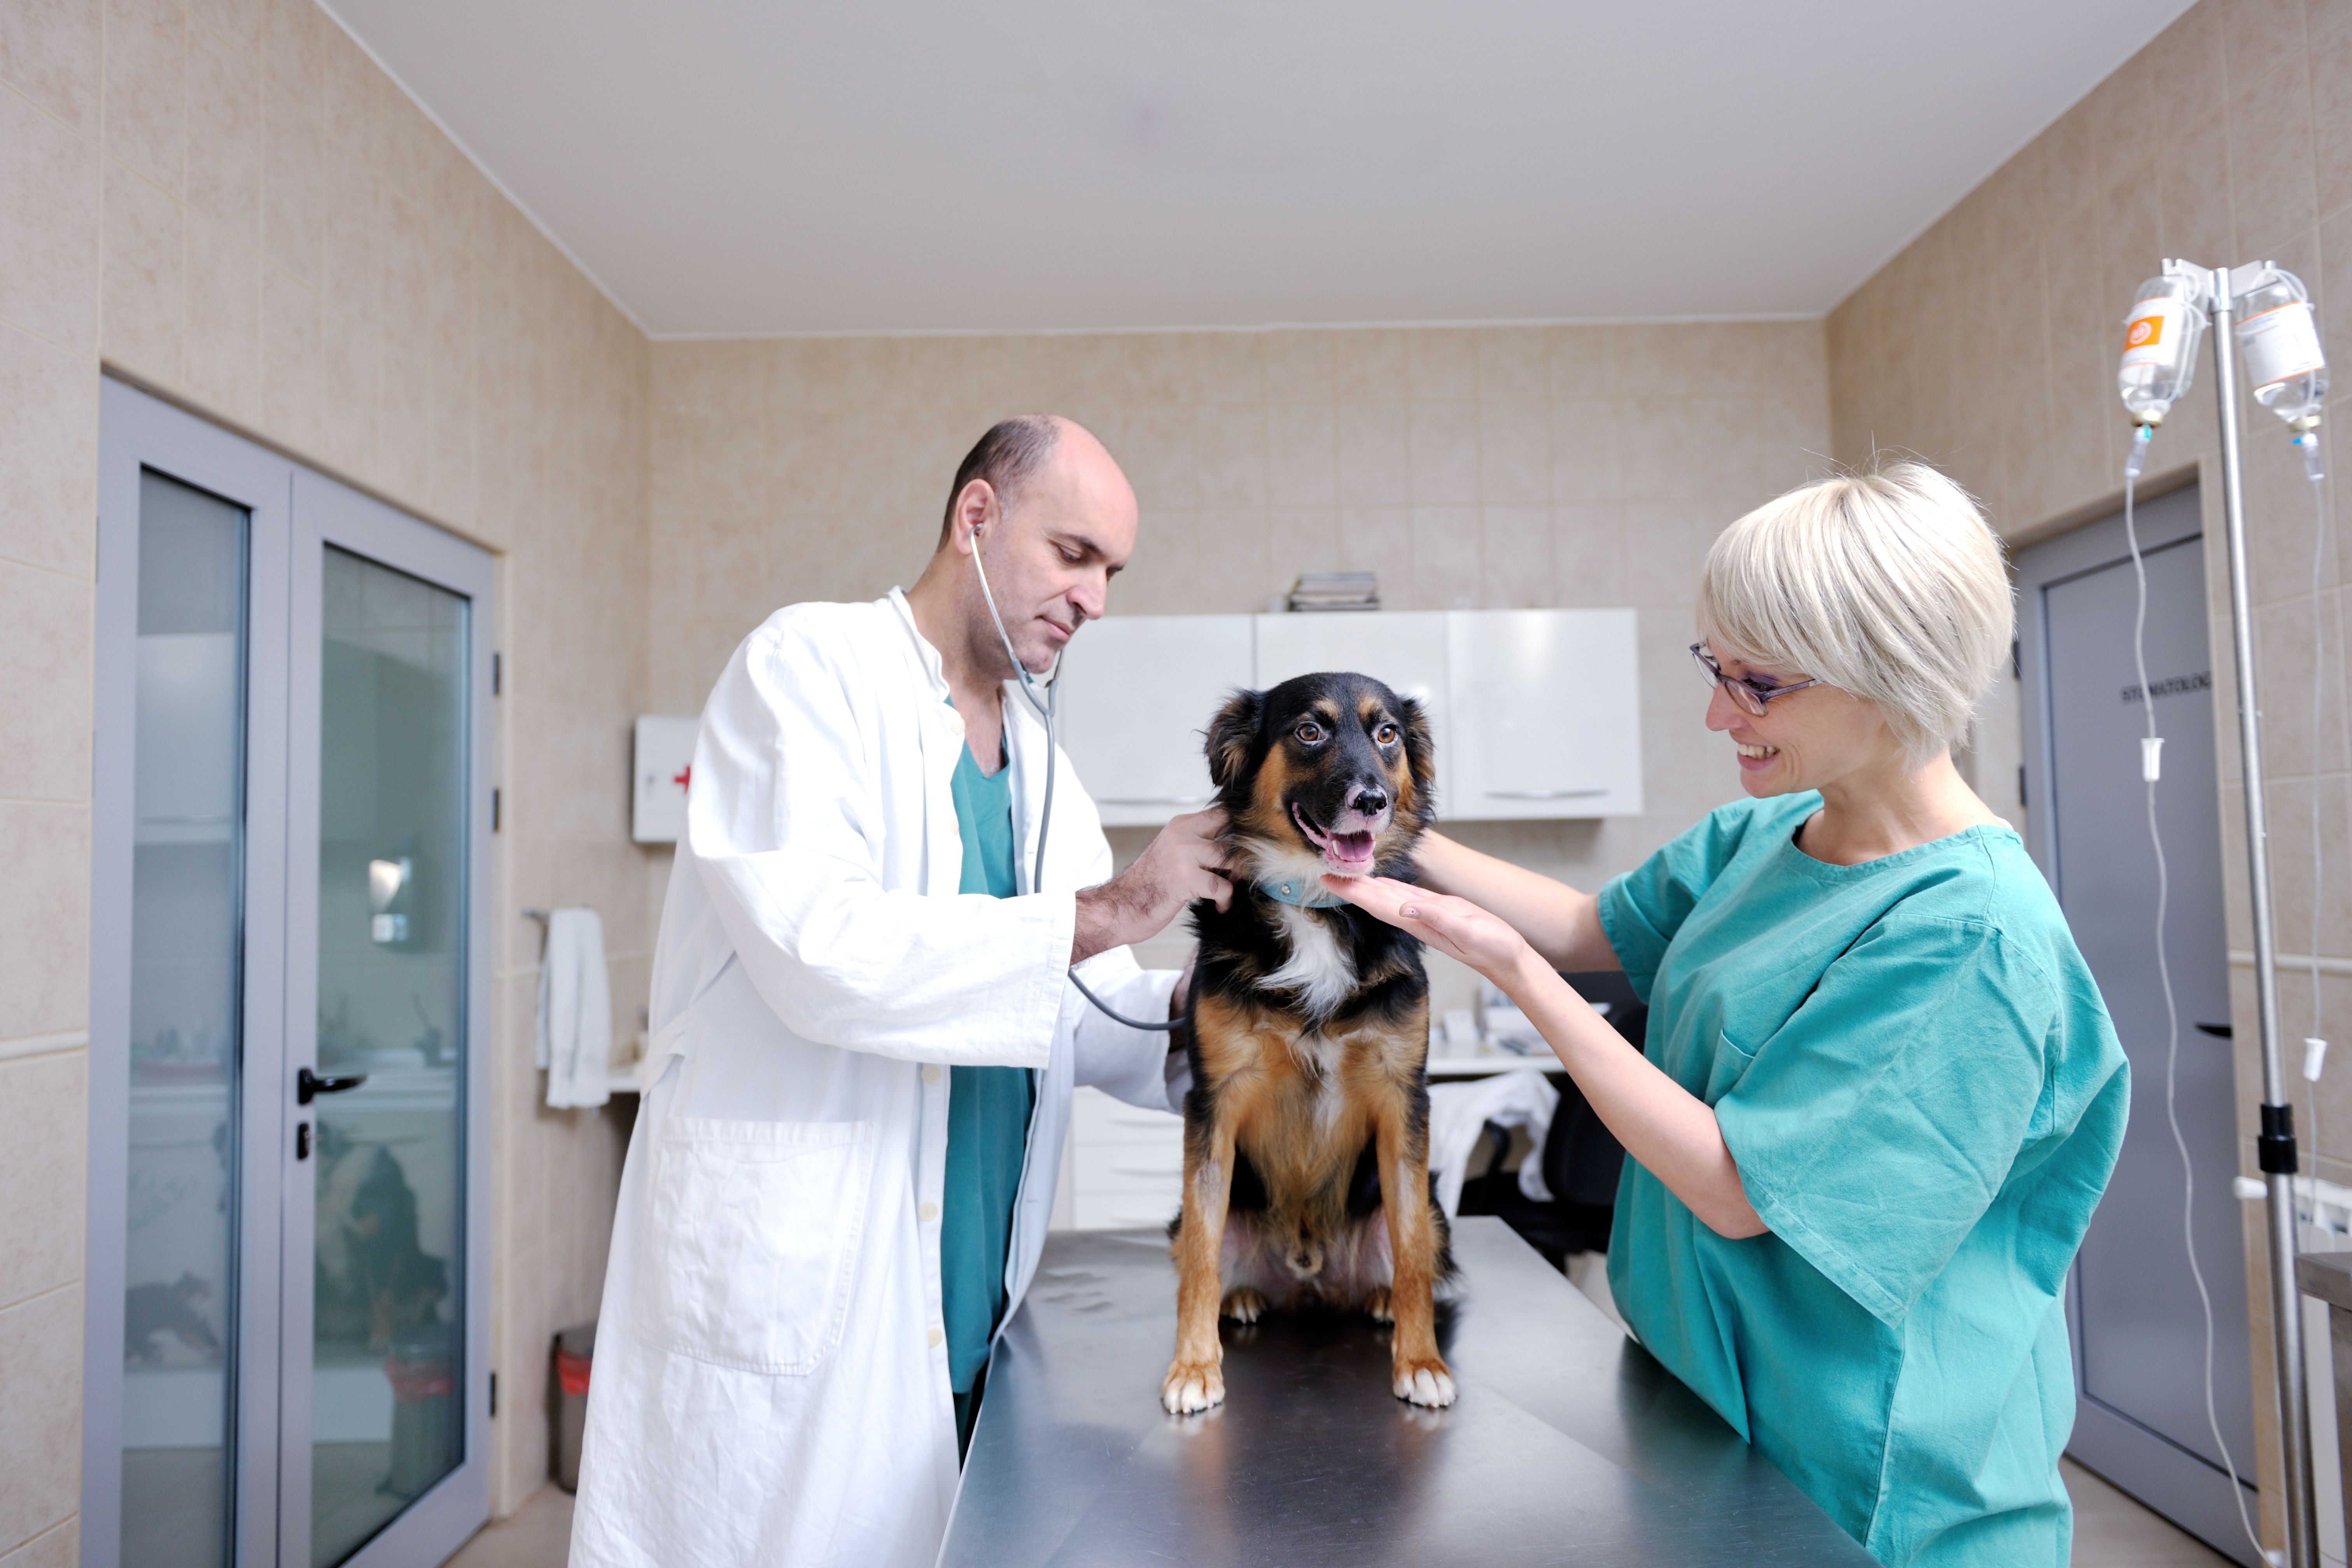 How to establish a healthy workplace ecosystem at your veterinary practice